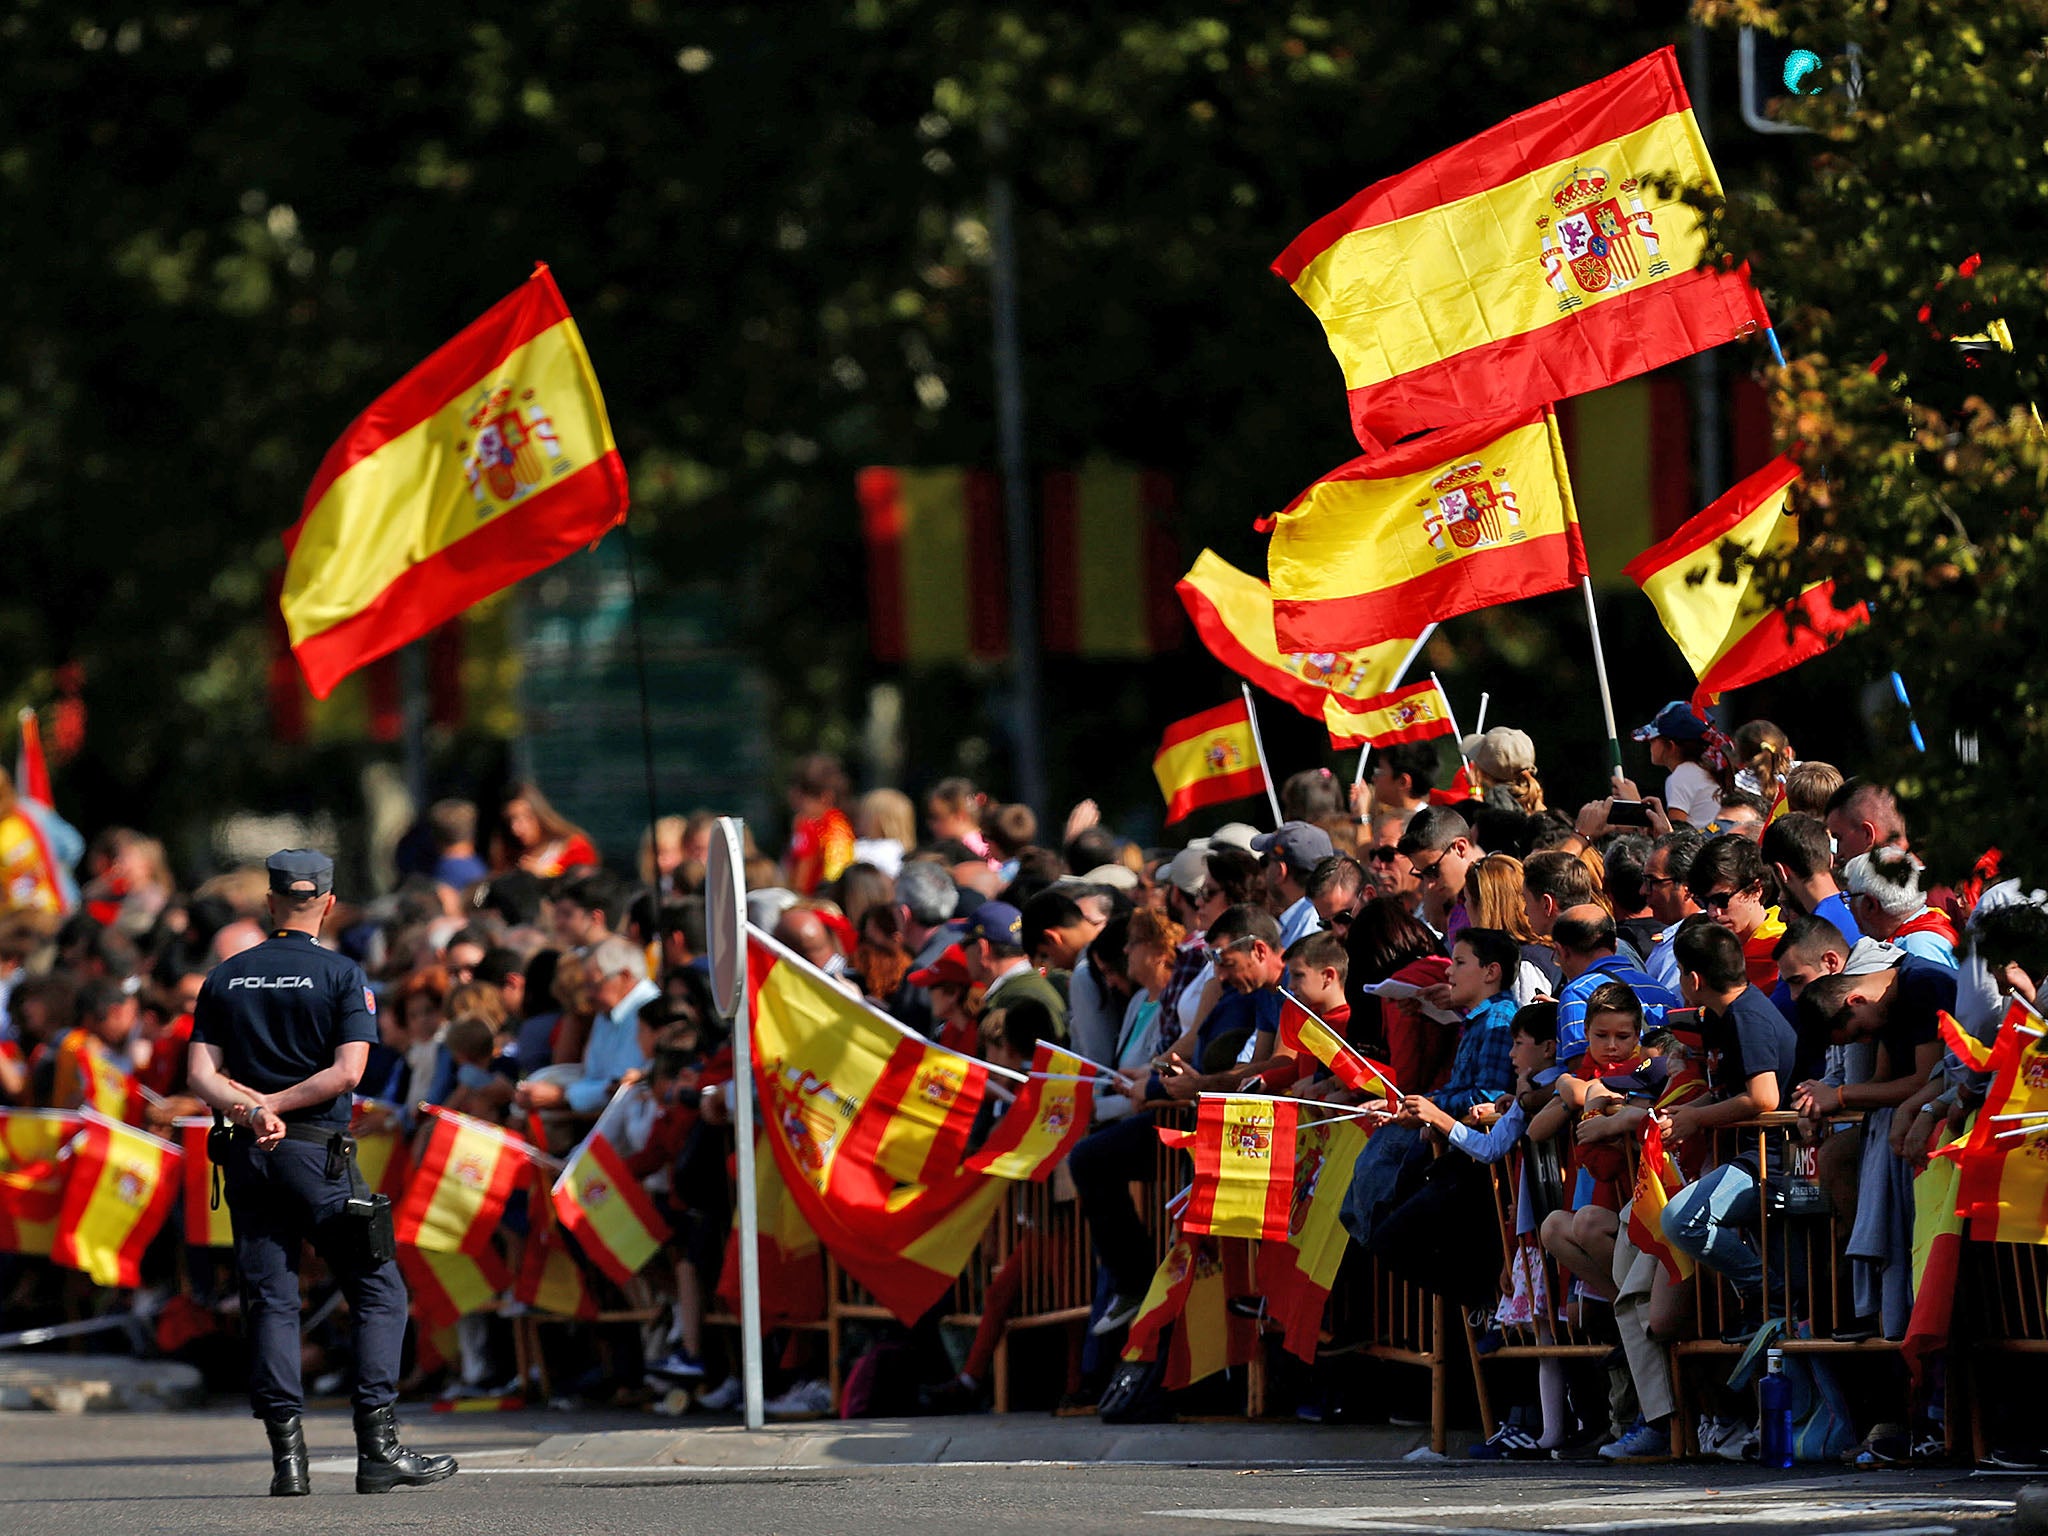 The Spanish capital was teeming with patriotic fervour, in part a response to Catalonia’s referendum